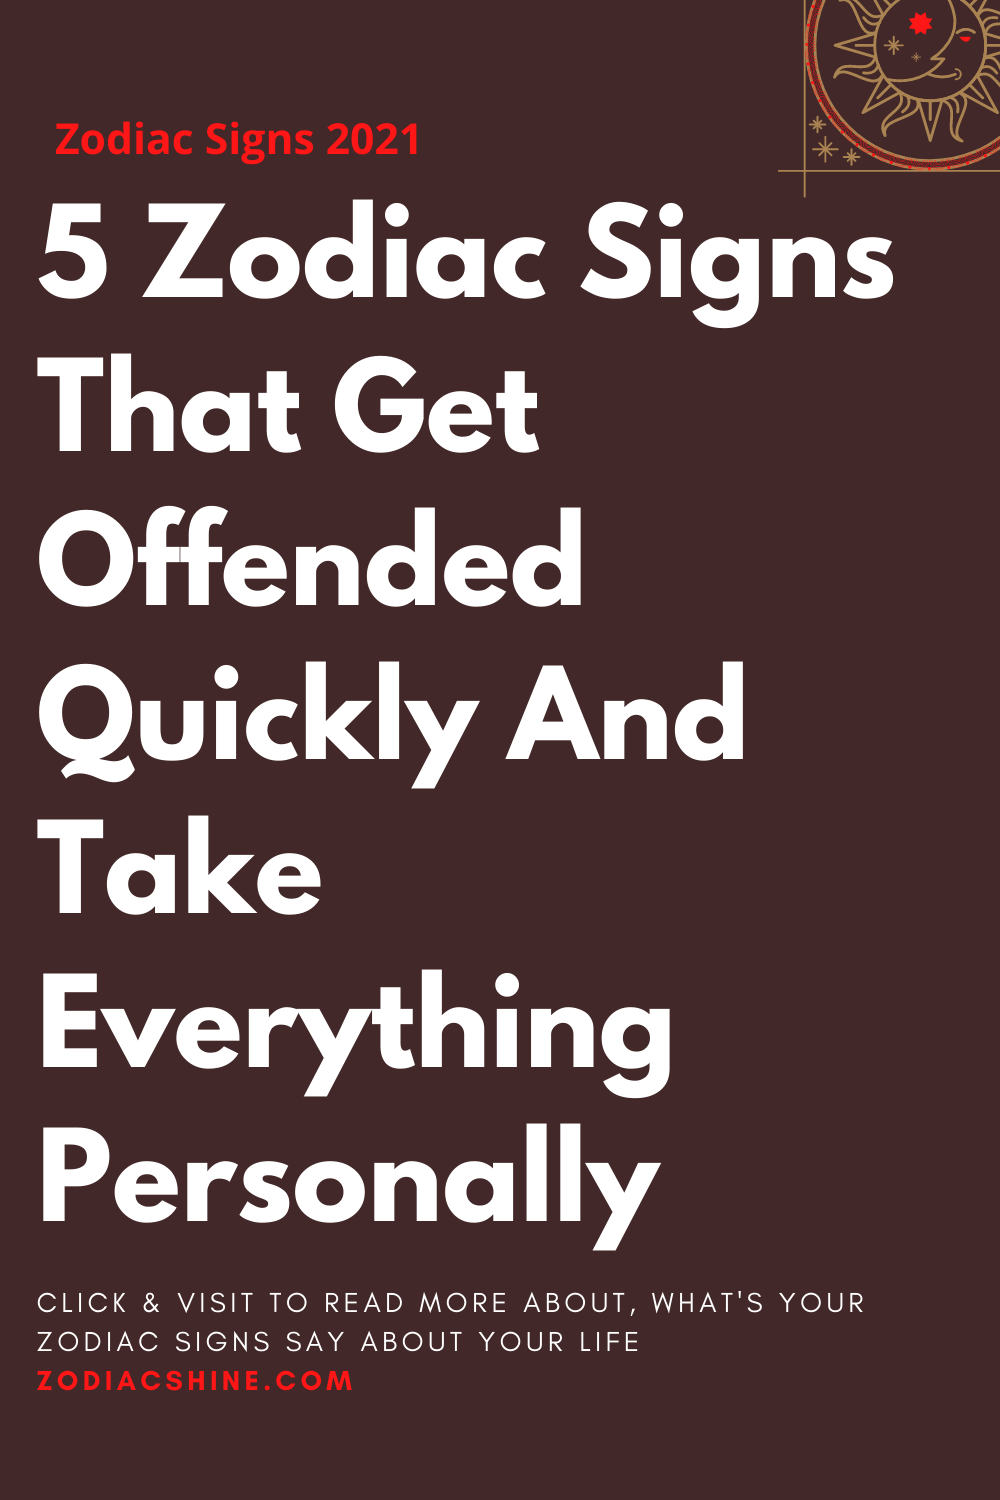 5 Zodiac Signs That Get Offended Quickly And Take Everything Personally